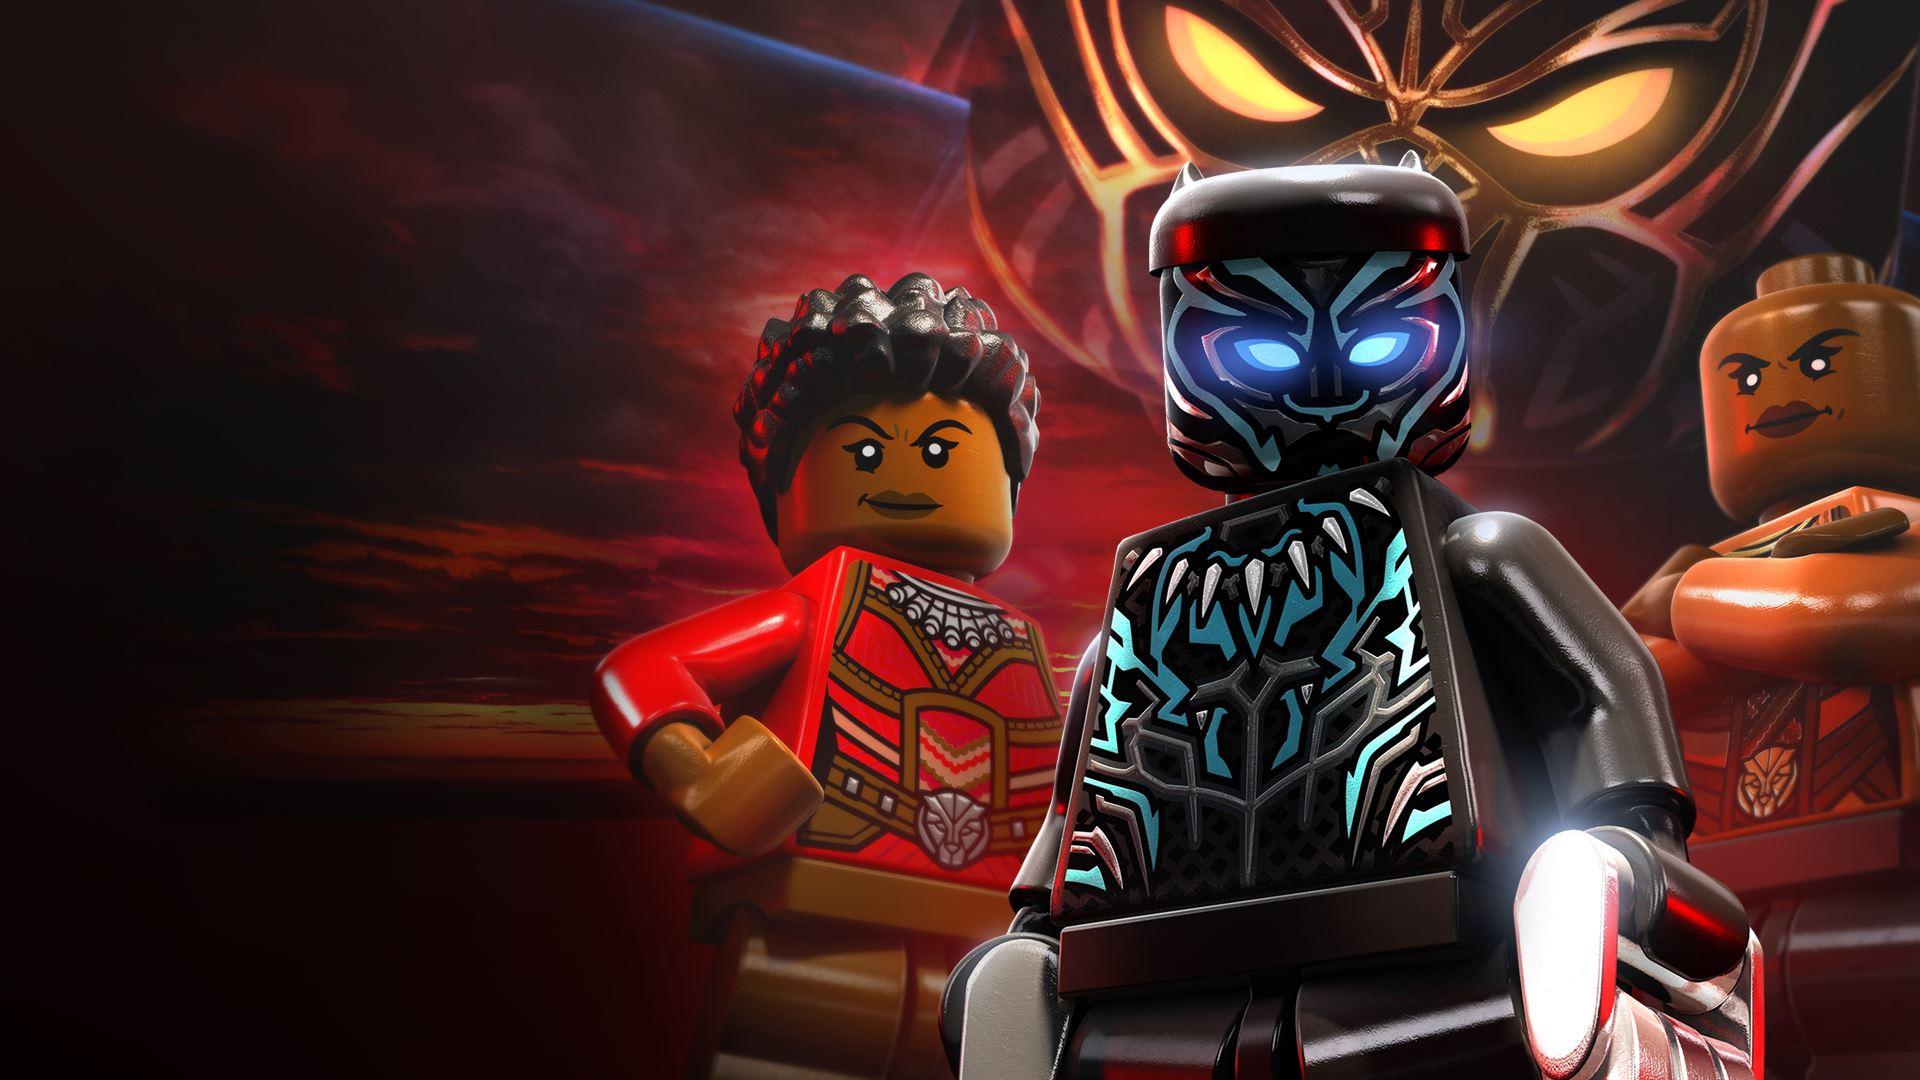 Travel to Wakanda with Black Panther in New DLC for LEGO Marvel